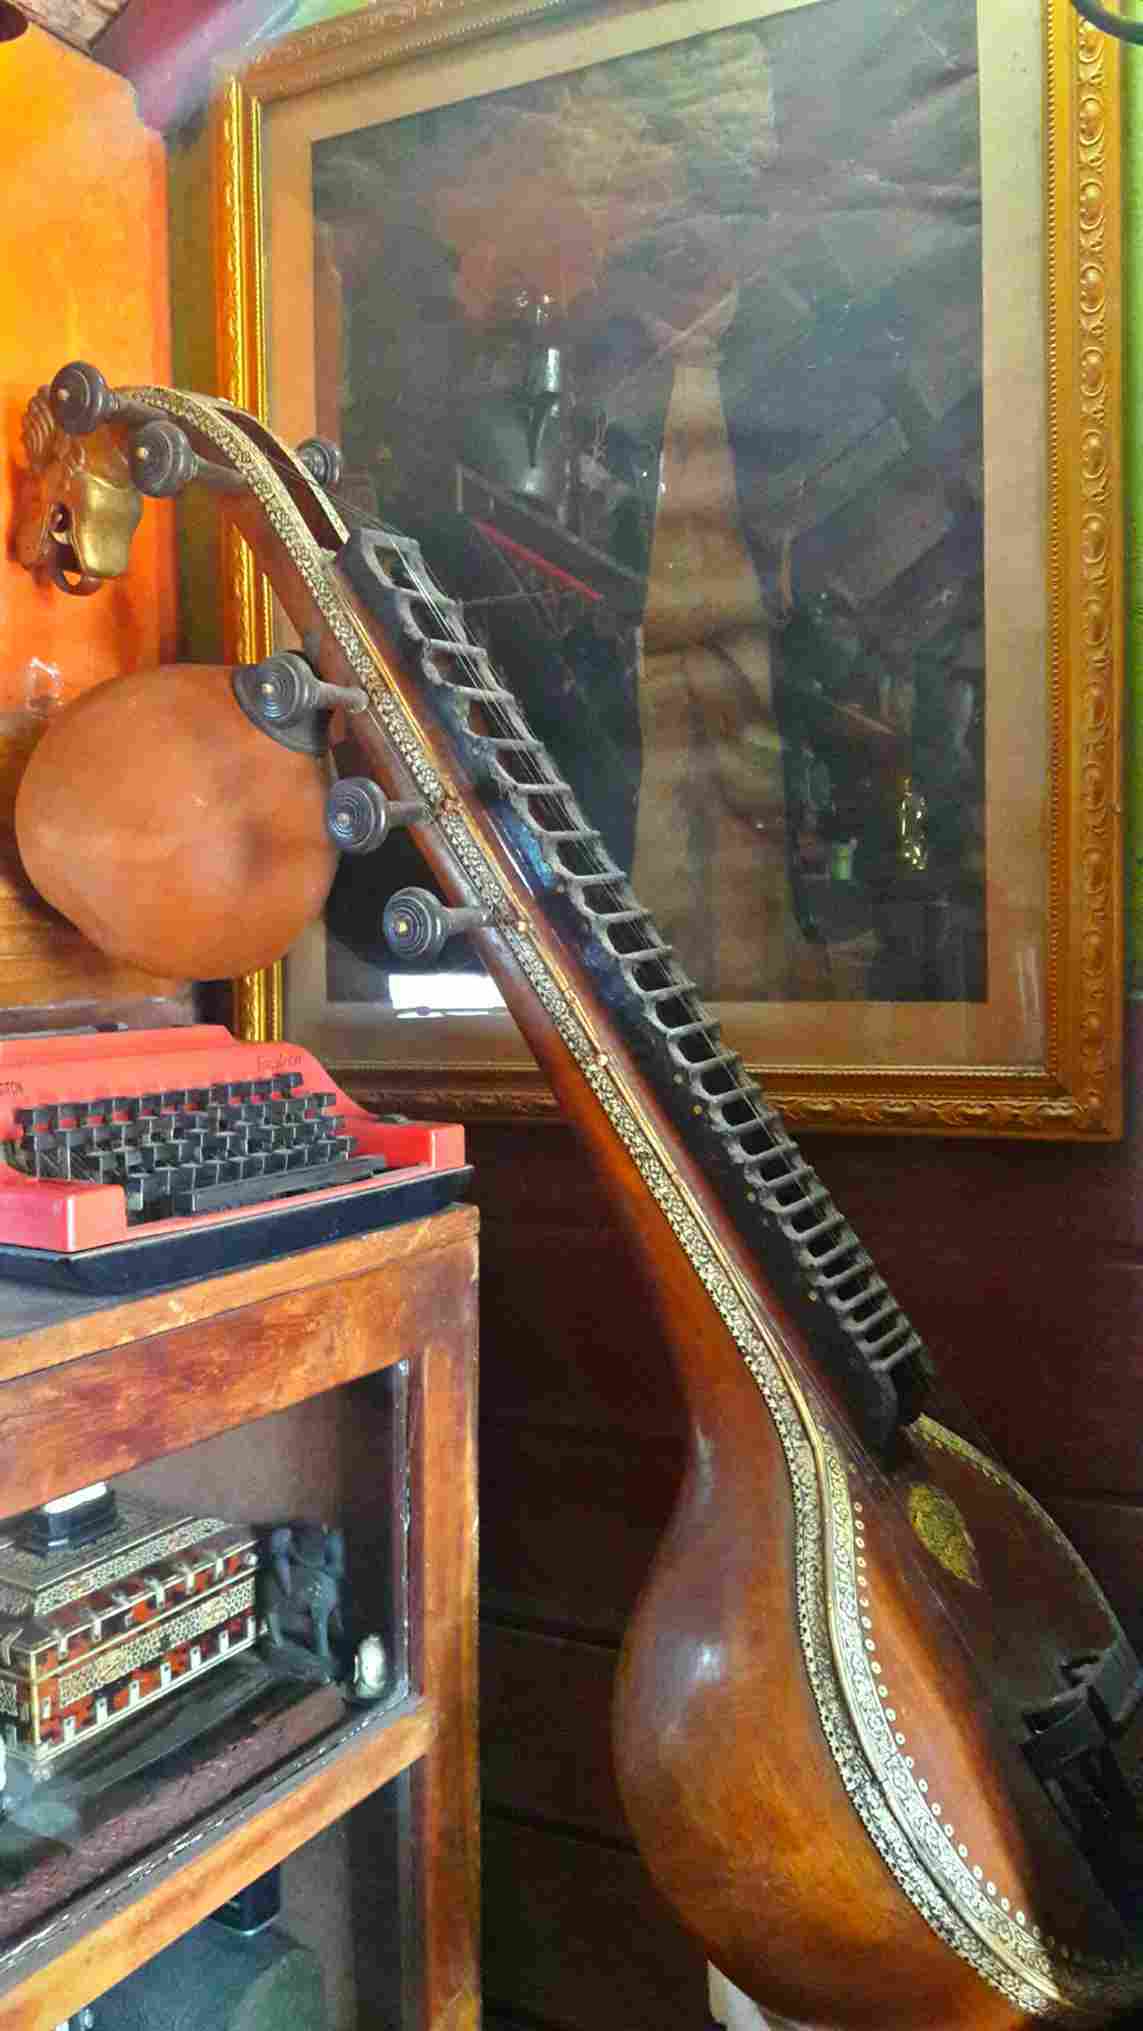 Veena musical instrument made from ivory